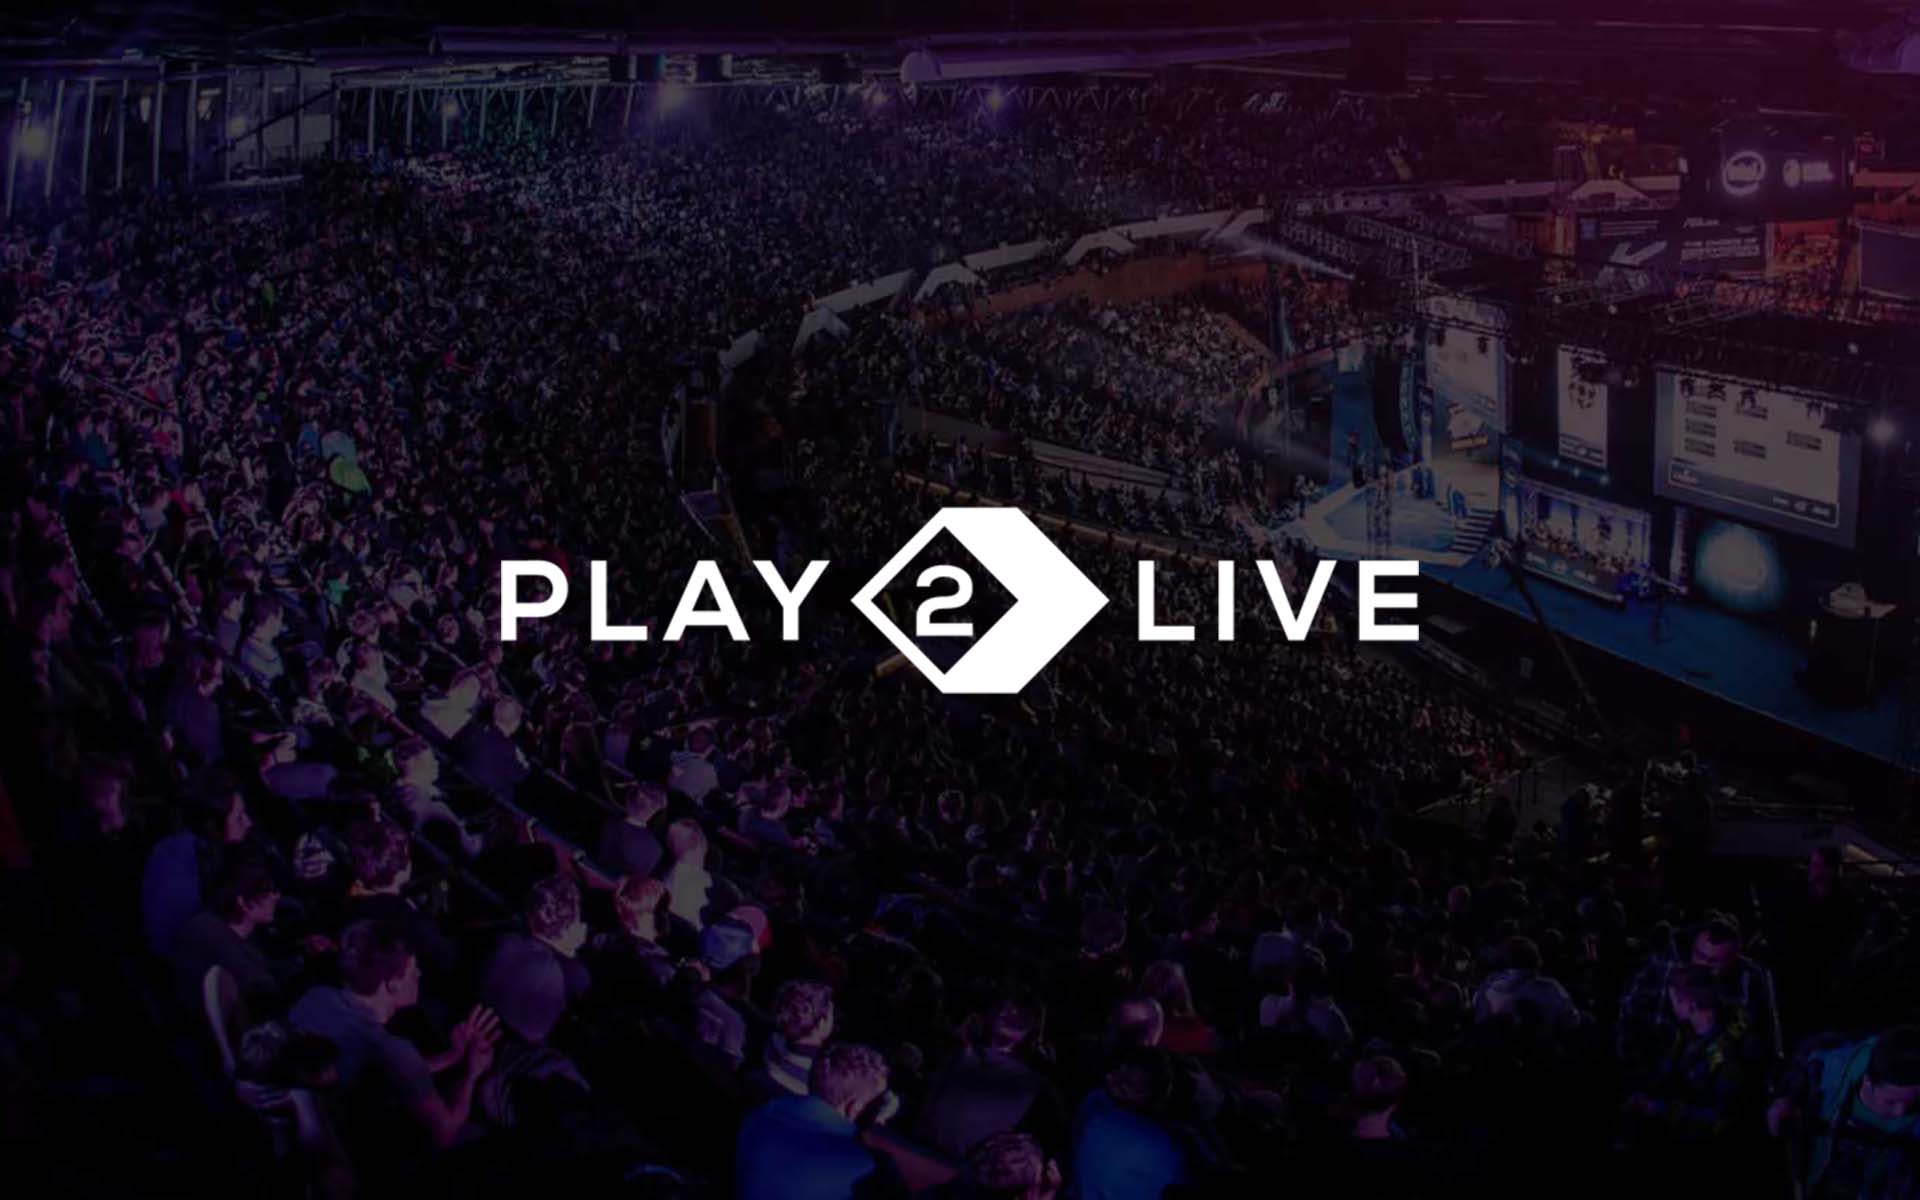 Play2Live Develops Its Own Blockchain Called Level Up Chain